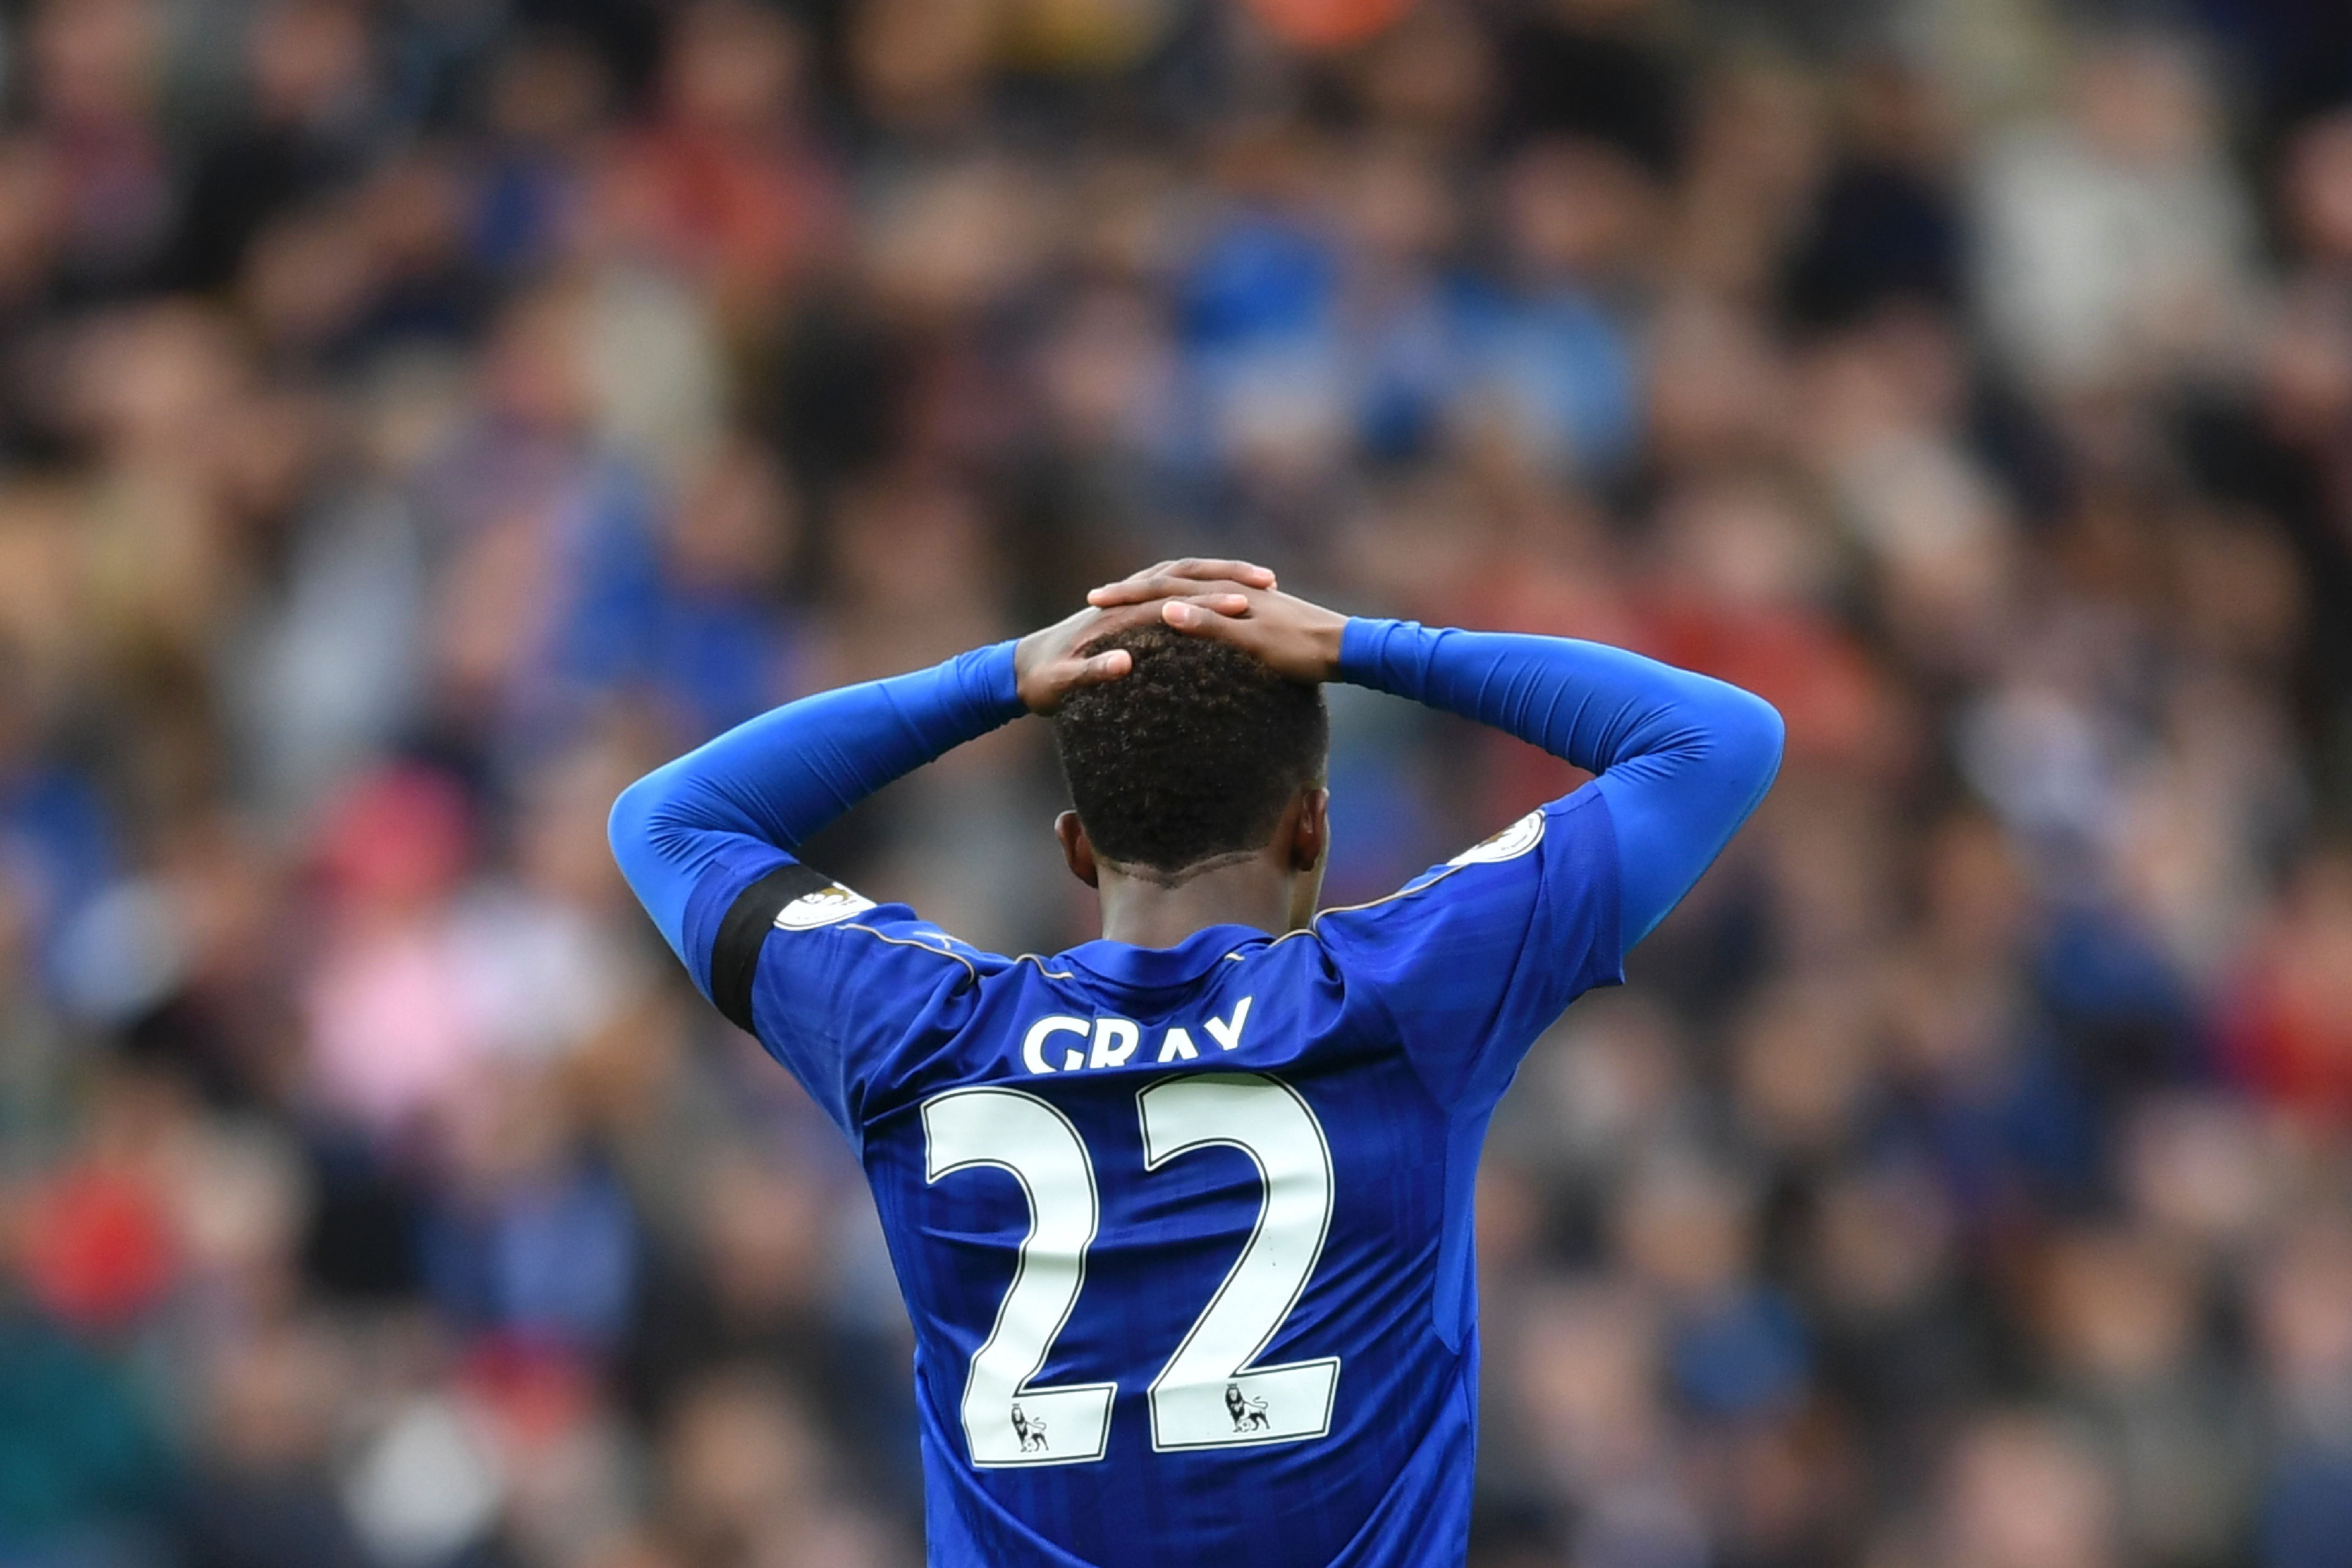 Leicester City's English midfielder Demarai Gray reacts during the English Premier League football match between Leicester City and Stoke City at King Power Stadium in Leicester, central England on April 1, 2017. / AFP PHOTO / Ben STANSALL / RESTRICTED TO EDITORIAL USE. No use with unauthorized audio, video, data, fixture lists, club/league logos or 'live' services. Online in-match use limited to 75 images, no video emulation. No use in betting, games or single club/league/player publications.  /         (Photo credit should read BEN STANSALL/AFP/Getty Images)